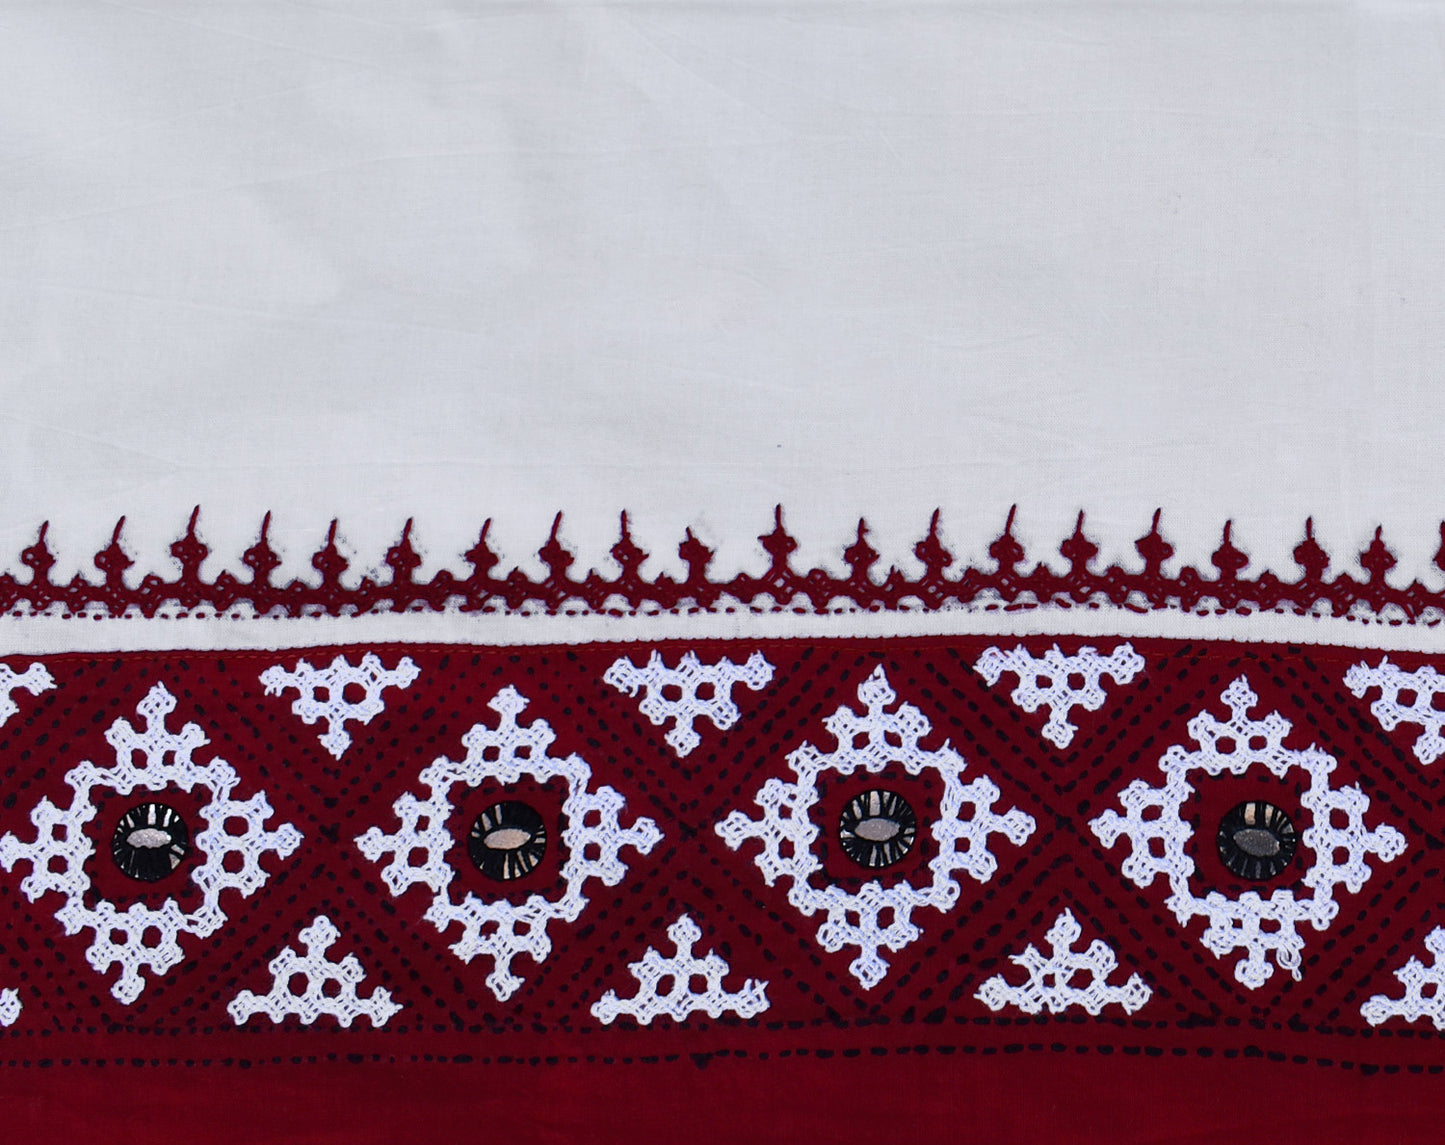 Cotton Blouse fabric with Bengal Hand Embroidery work in Kutch mirror work style